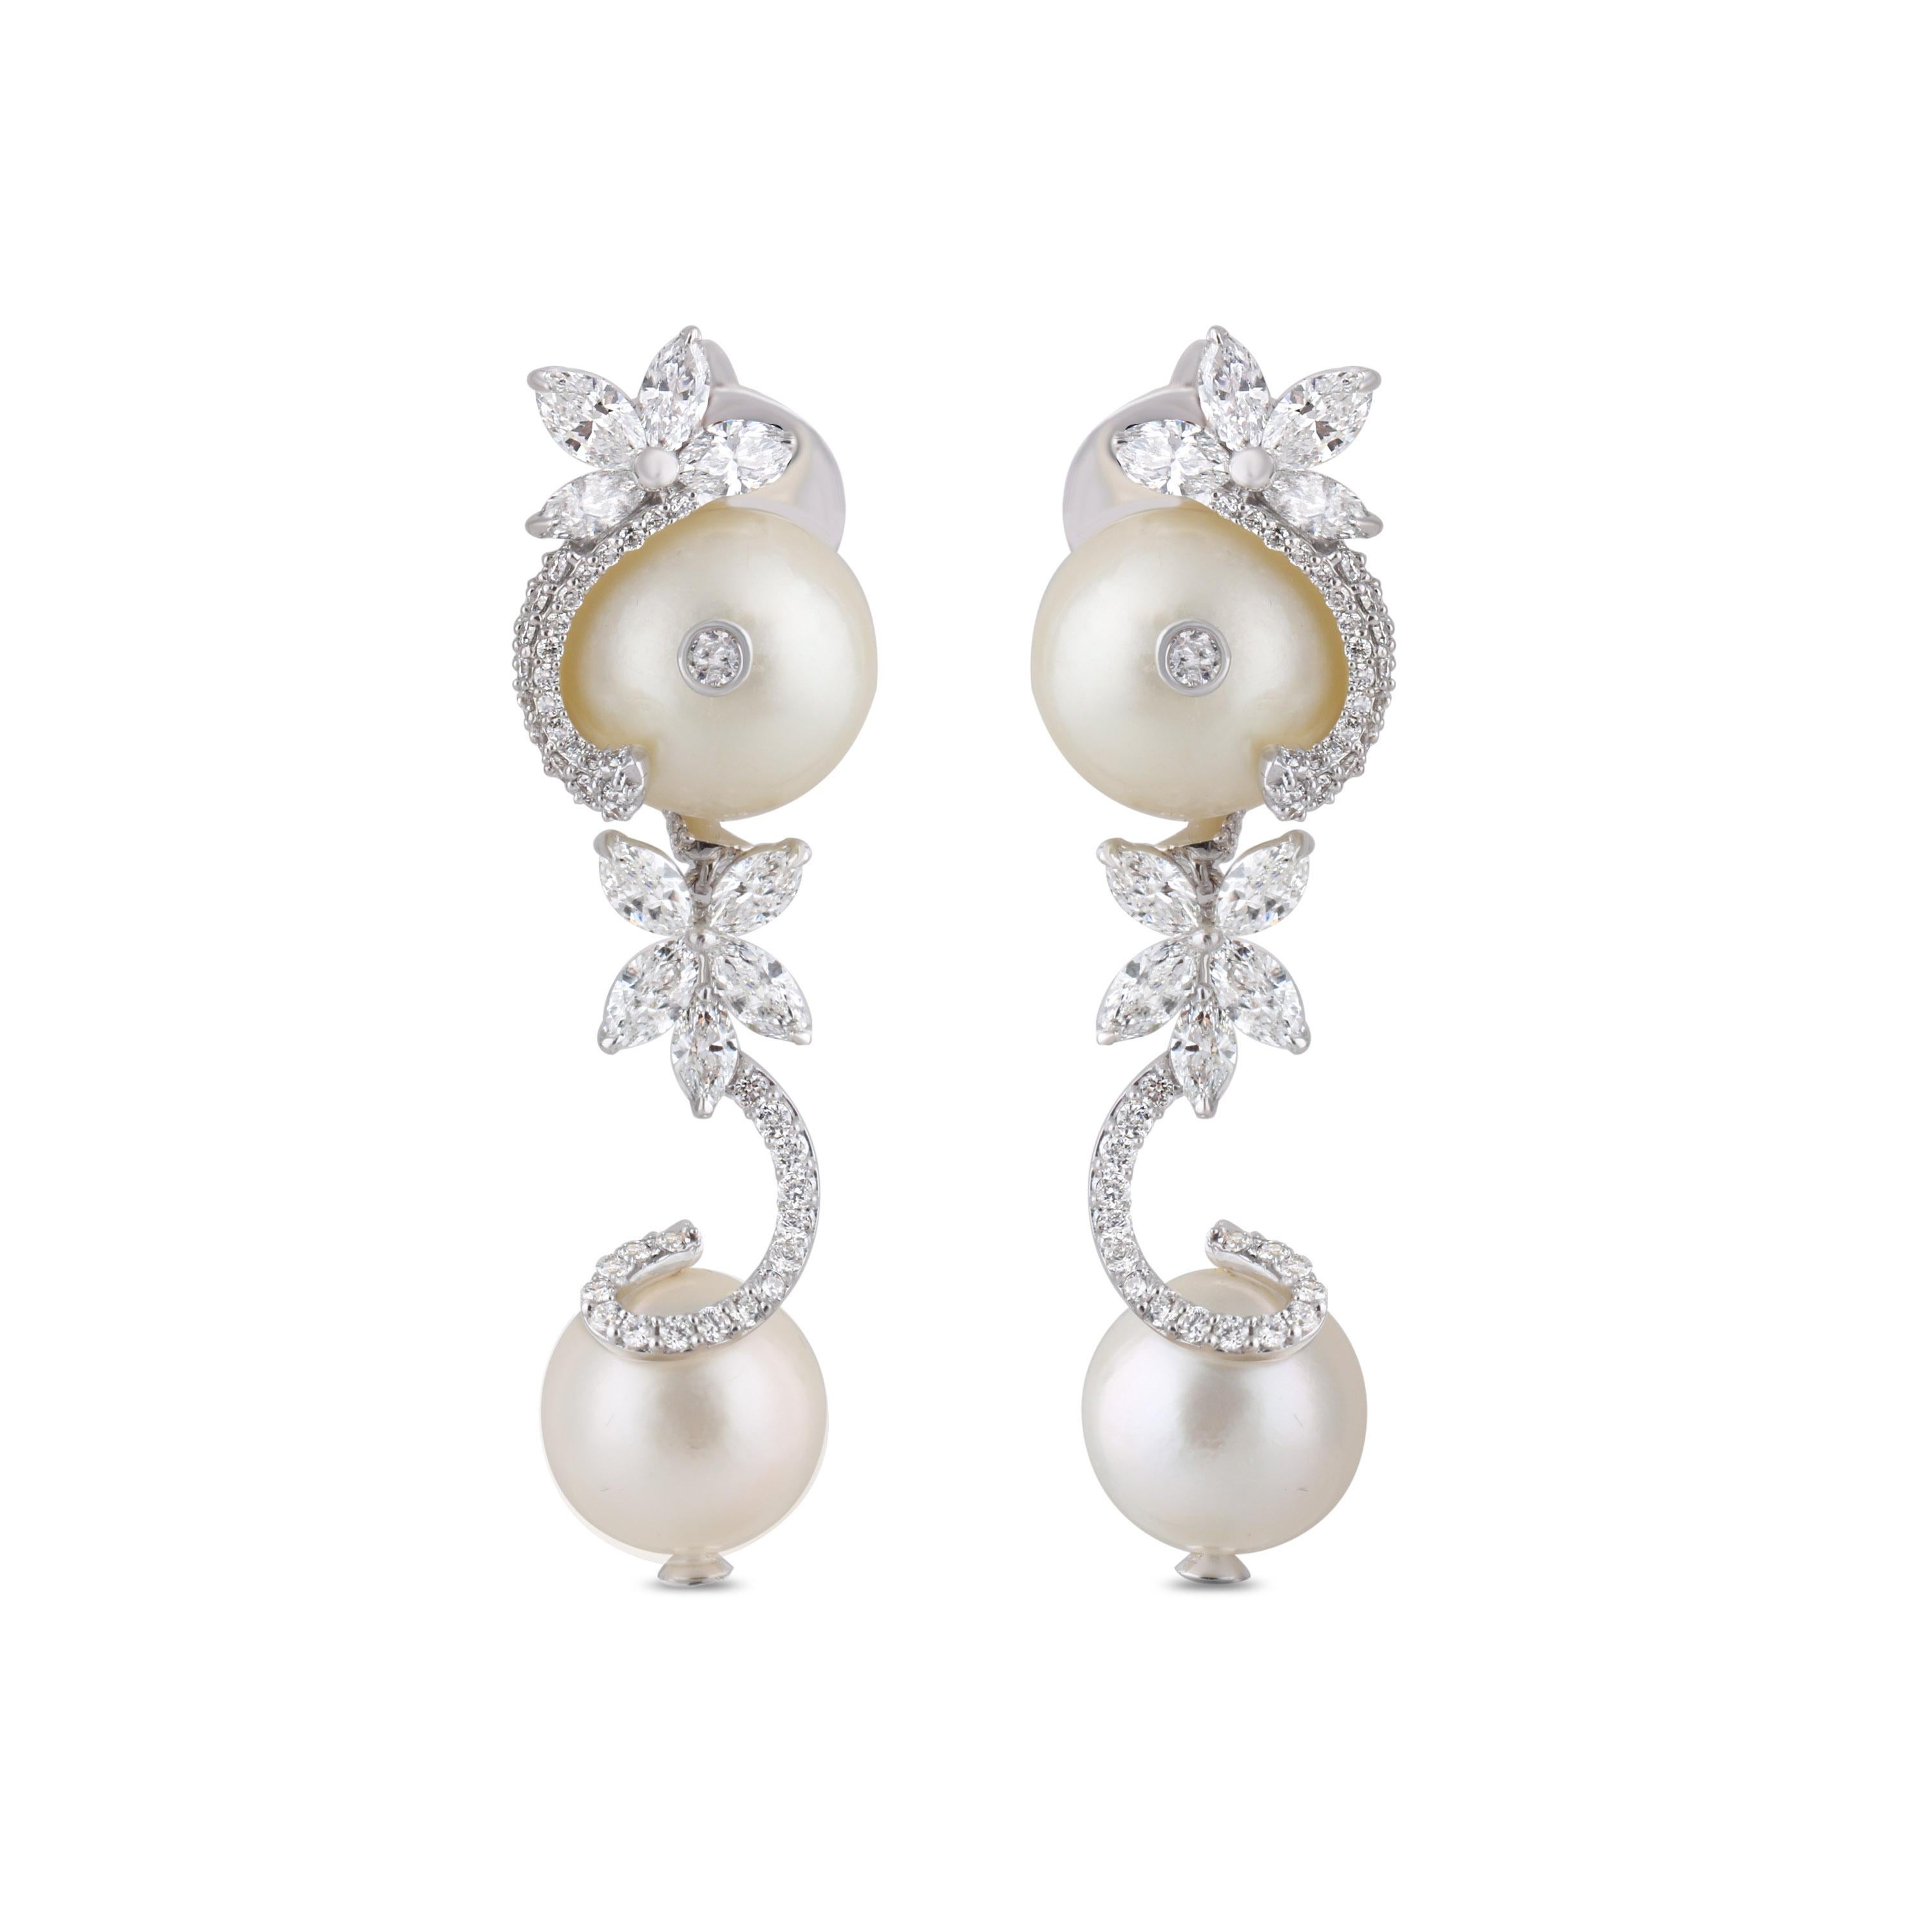 Studio Rêves Diamond and Pearl Drop Earrings in 18 Karat White Gold In New Condition For Sale In Mumbai, Maharashtra